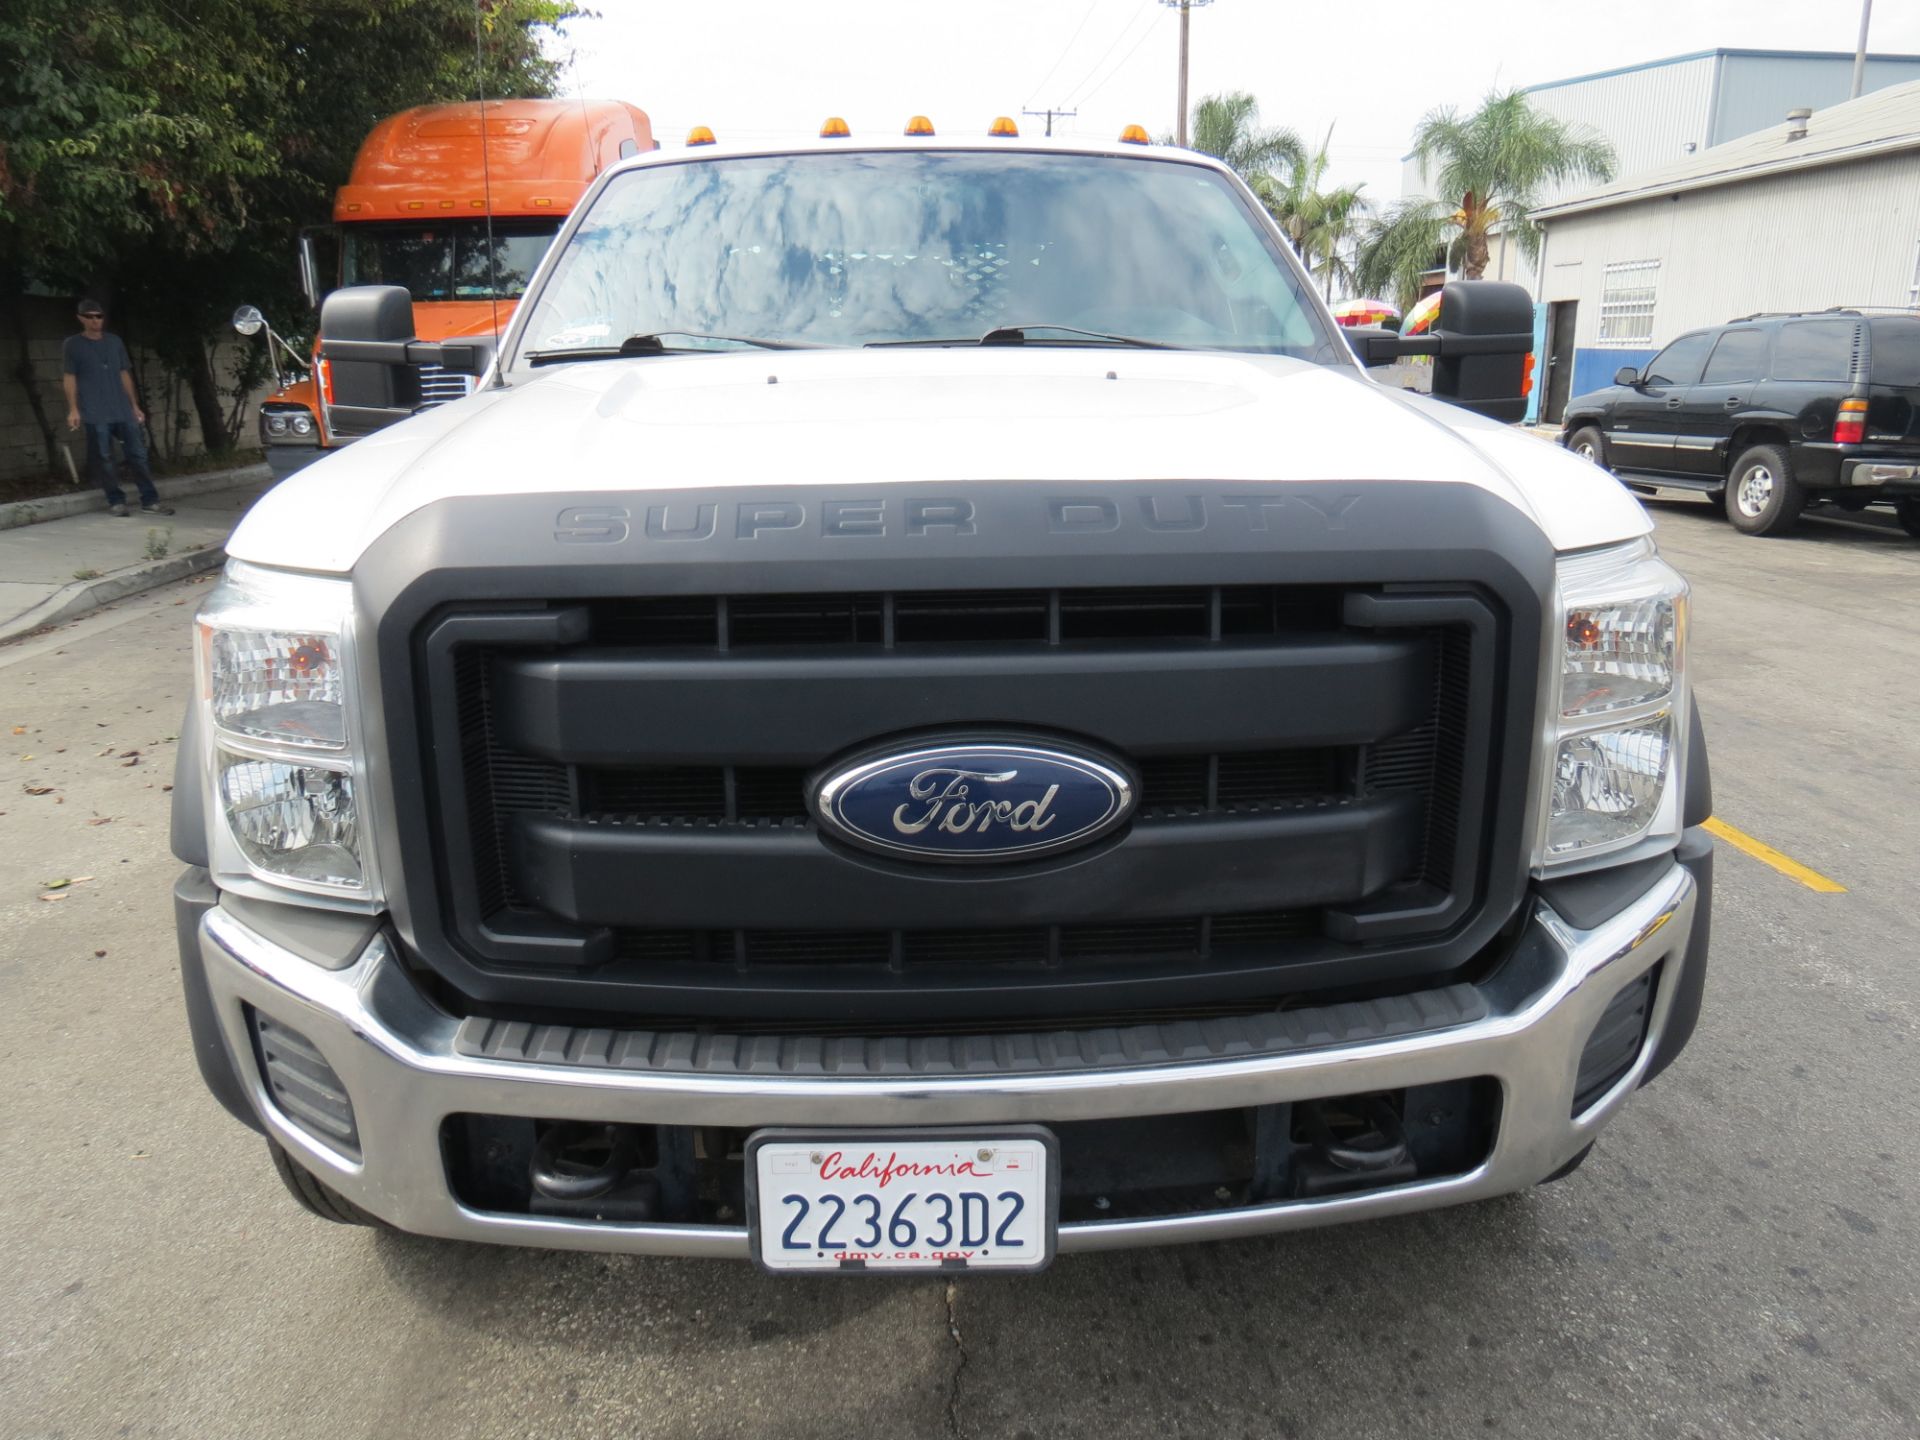 2015 Ford F-450 SUPER DUTY STAKE BED TRUCK, WITH LIFT GATE, SUPER CREW CAB , 6.7 POWER STROKE DIESEL - Image 3 of 34